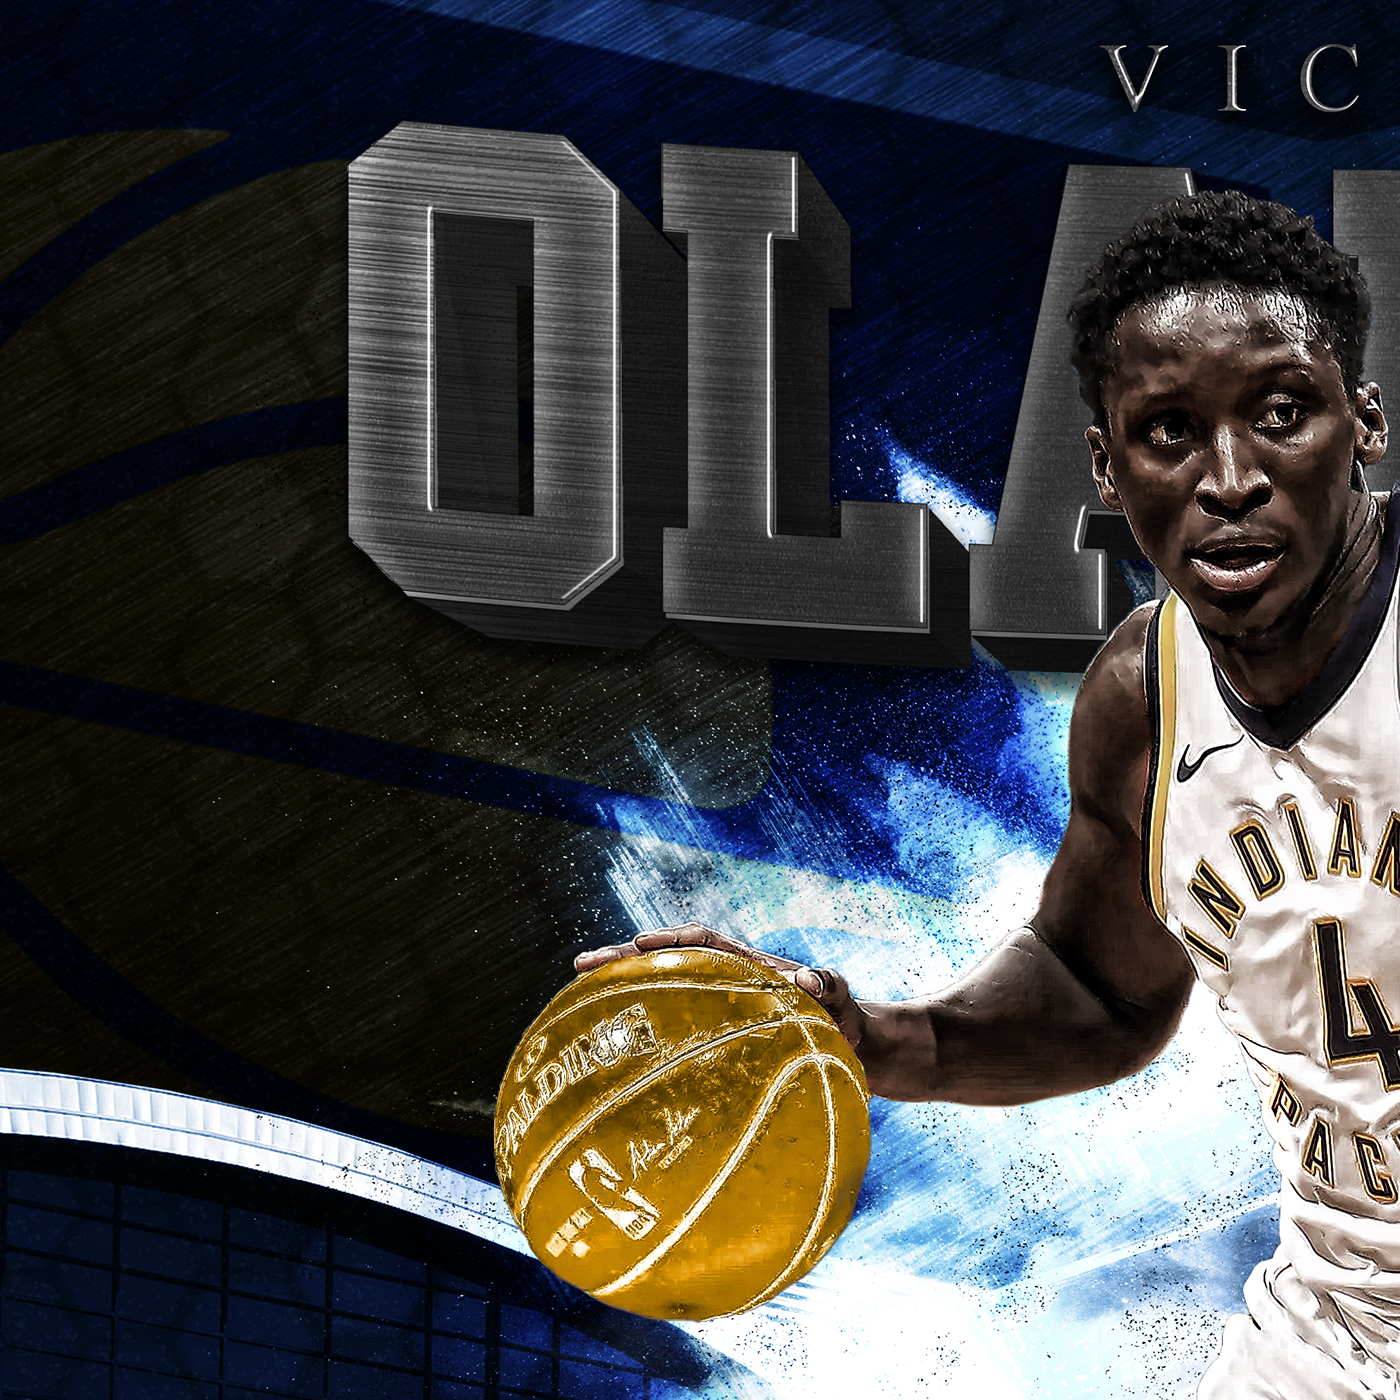 NBA basketball indiana Pacers Victor Oladipo DUNK poster print design sports